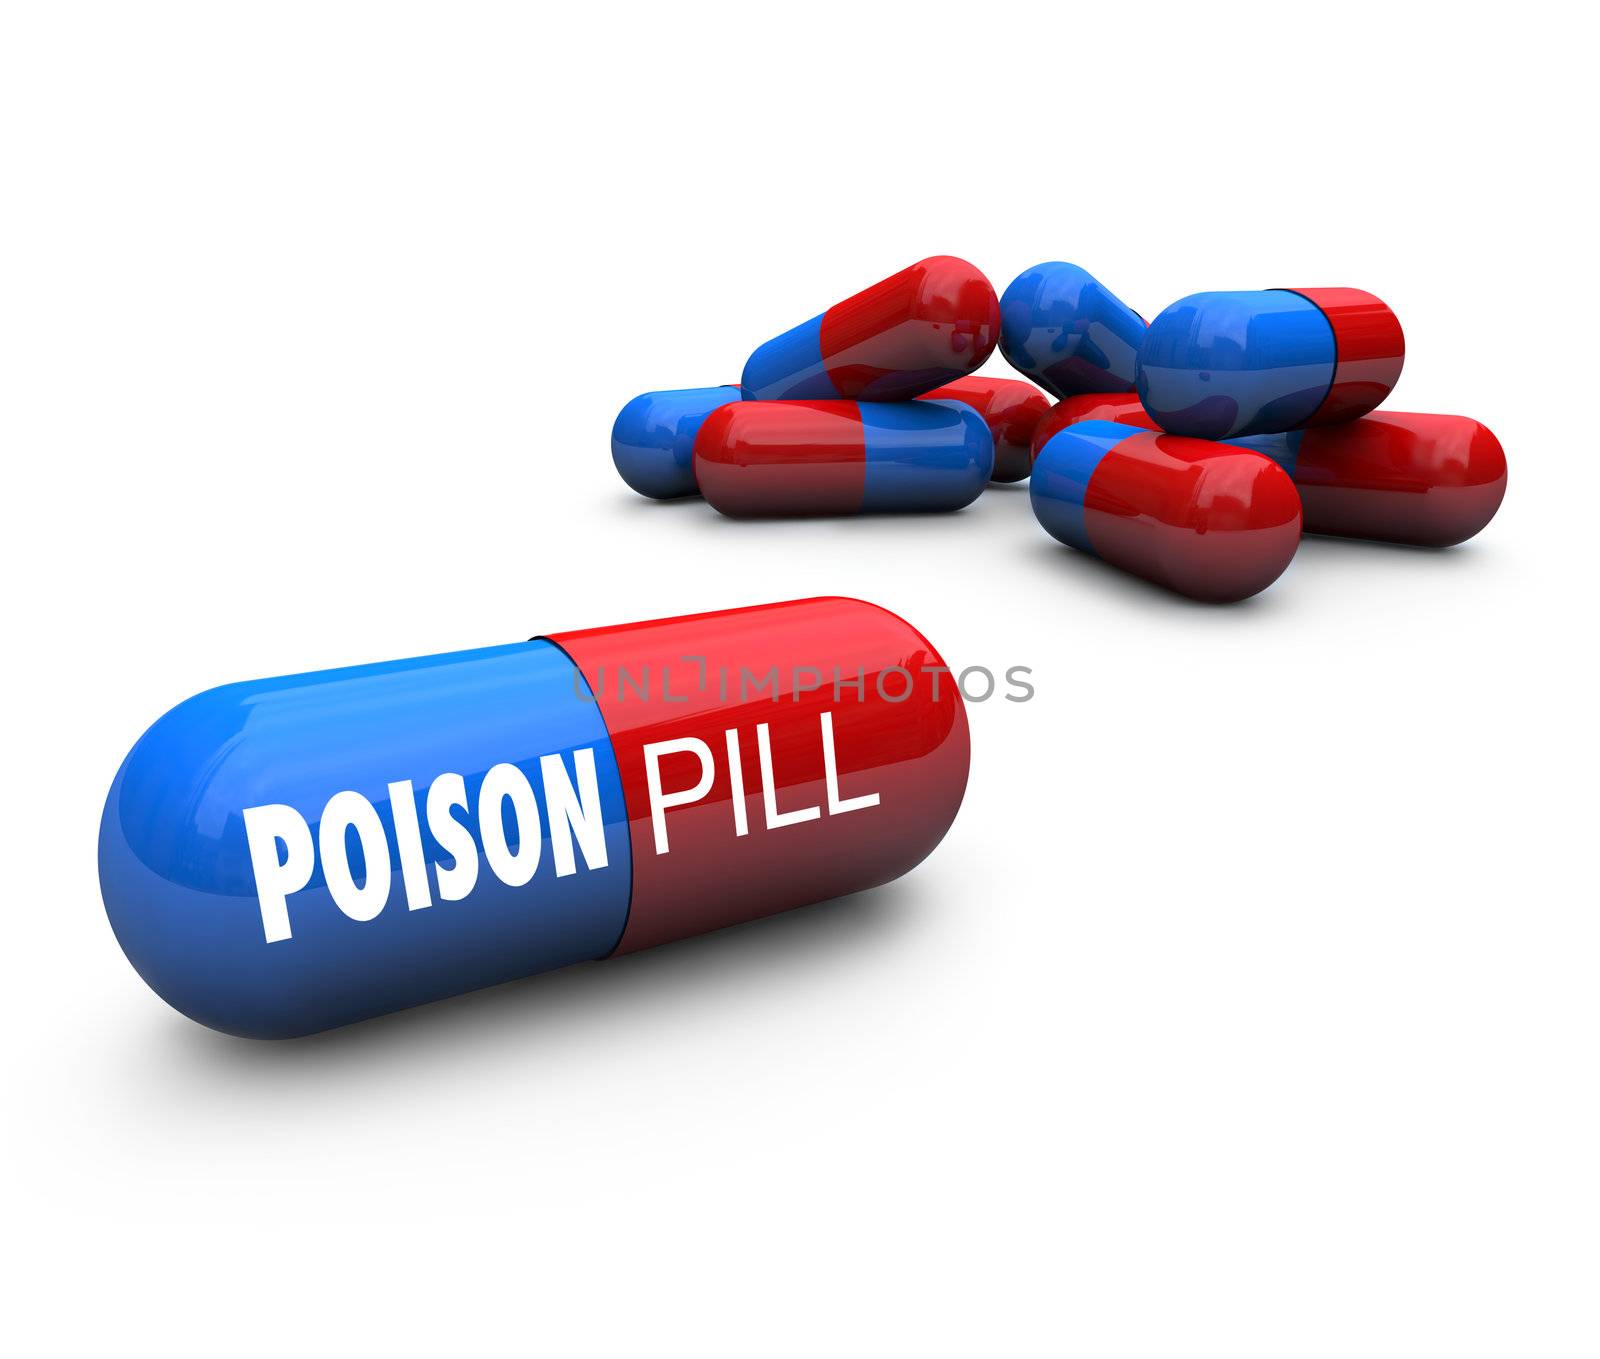 Close-up of some pills, one includes the words Poison Pill, representing the business strategy involving shareholder rights and the prevention of a hostile takeover of a company